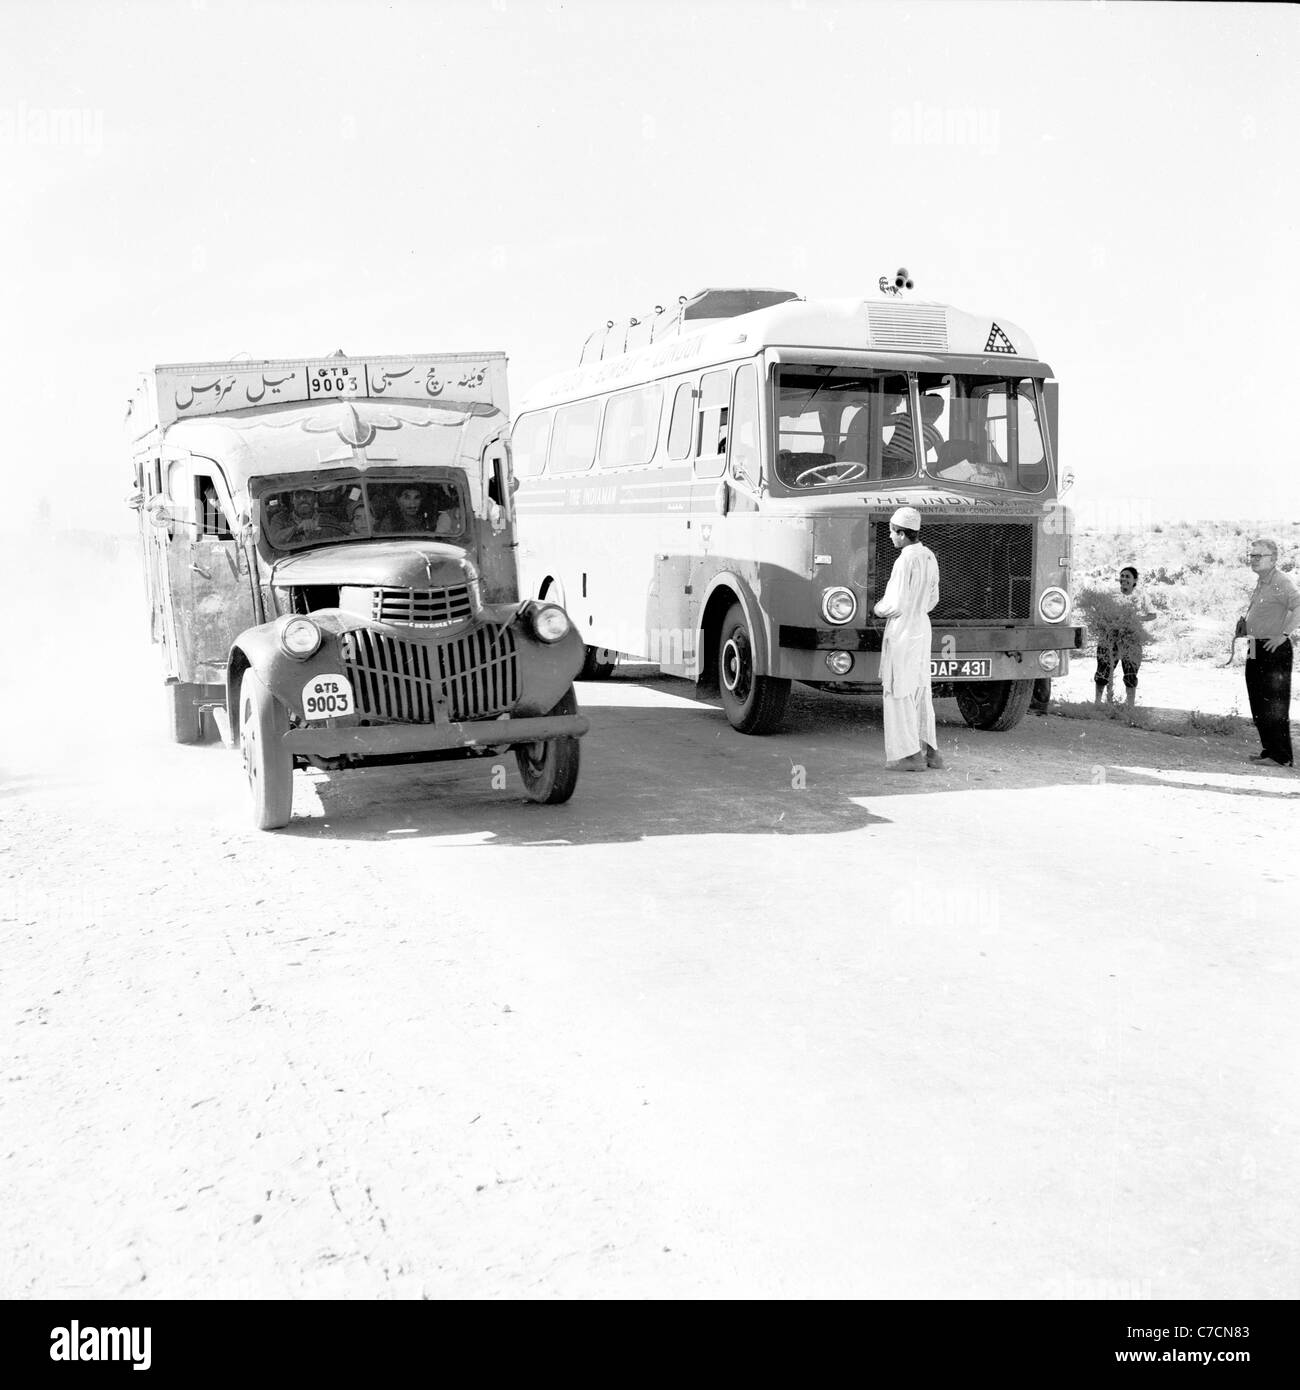 Two trucks at Dhadar, near the Bolan Pass, Pakistan, taken in the 1950s by J. Allan Cash. Stock Photo